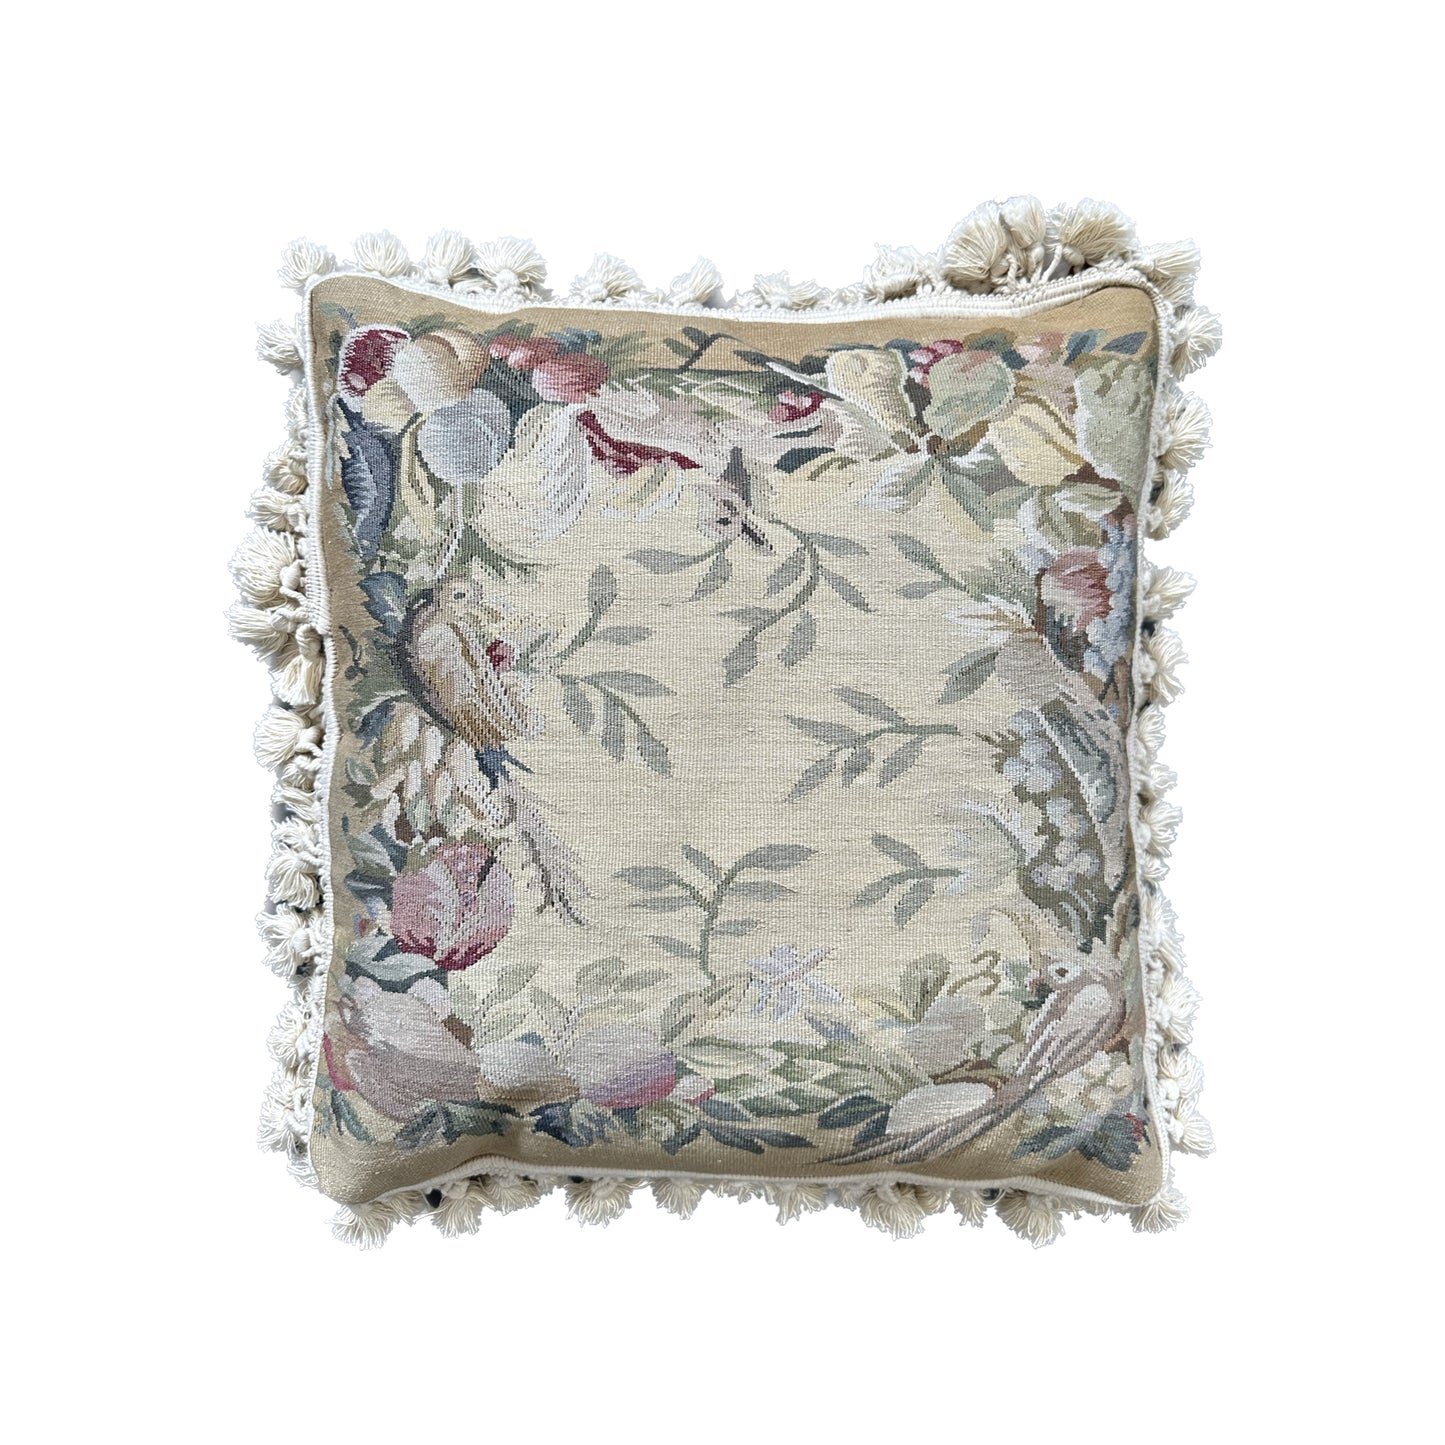 18"x18" French Aubusson Style Hand Woven Pillow with Birds